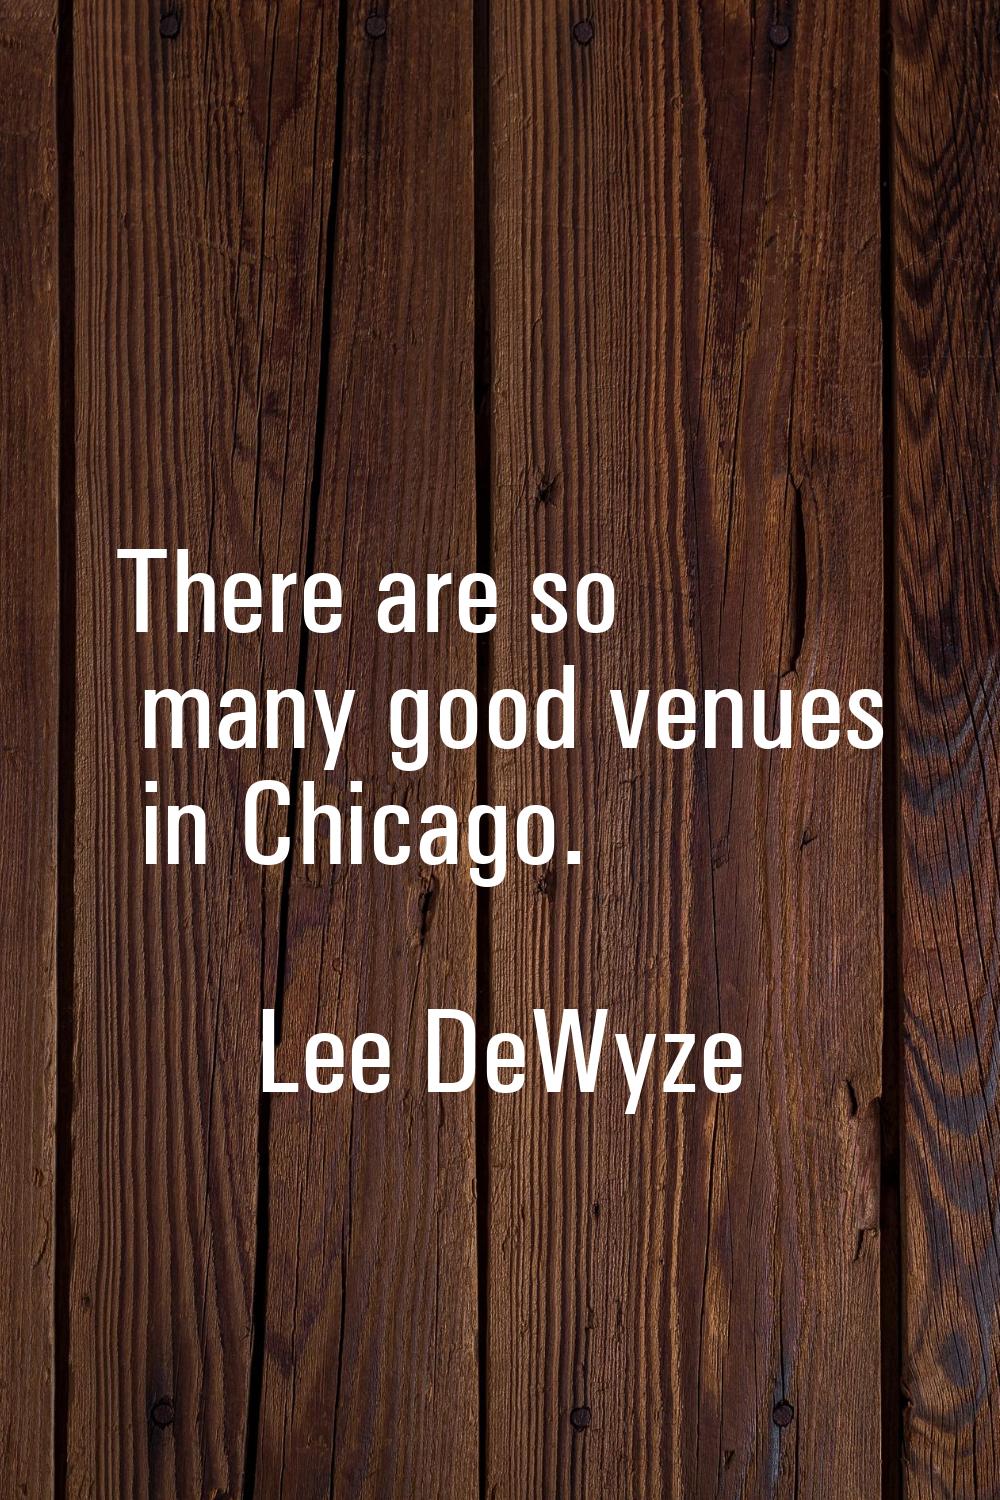 There are so many good venues in Chicago.